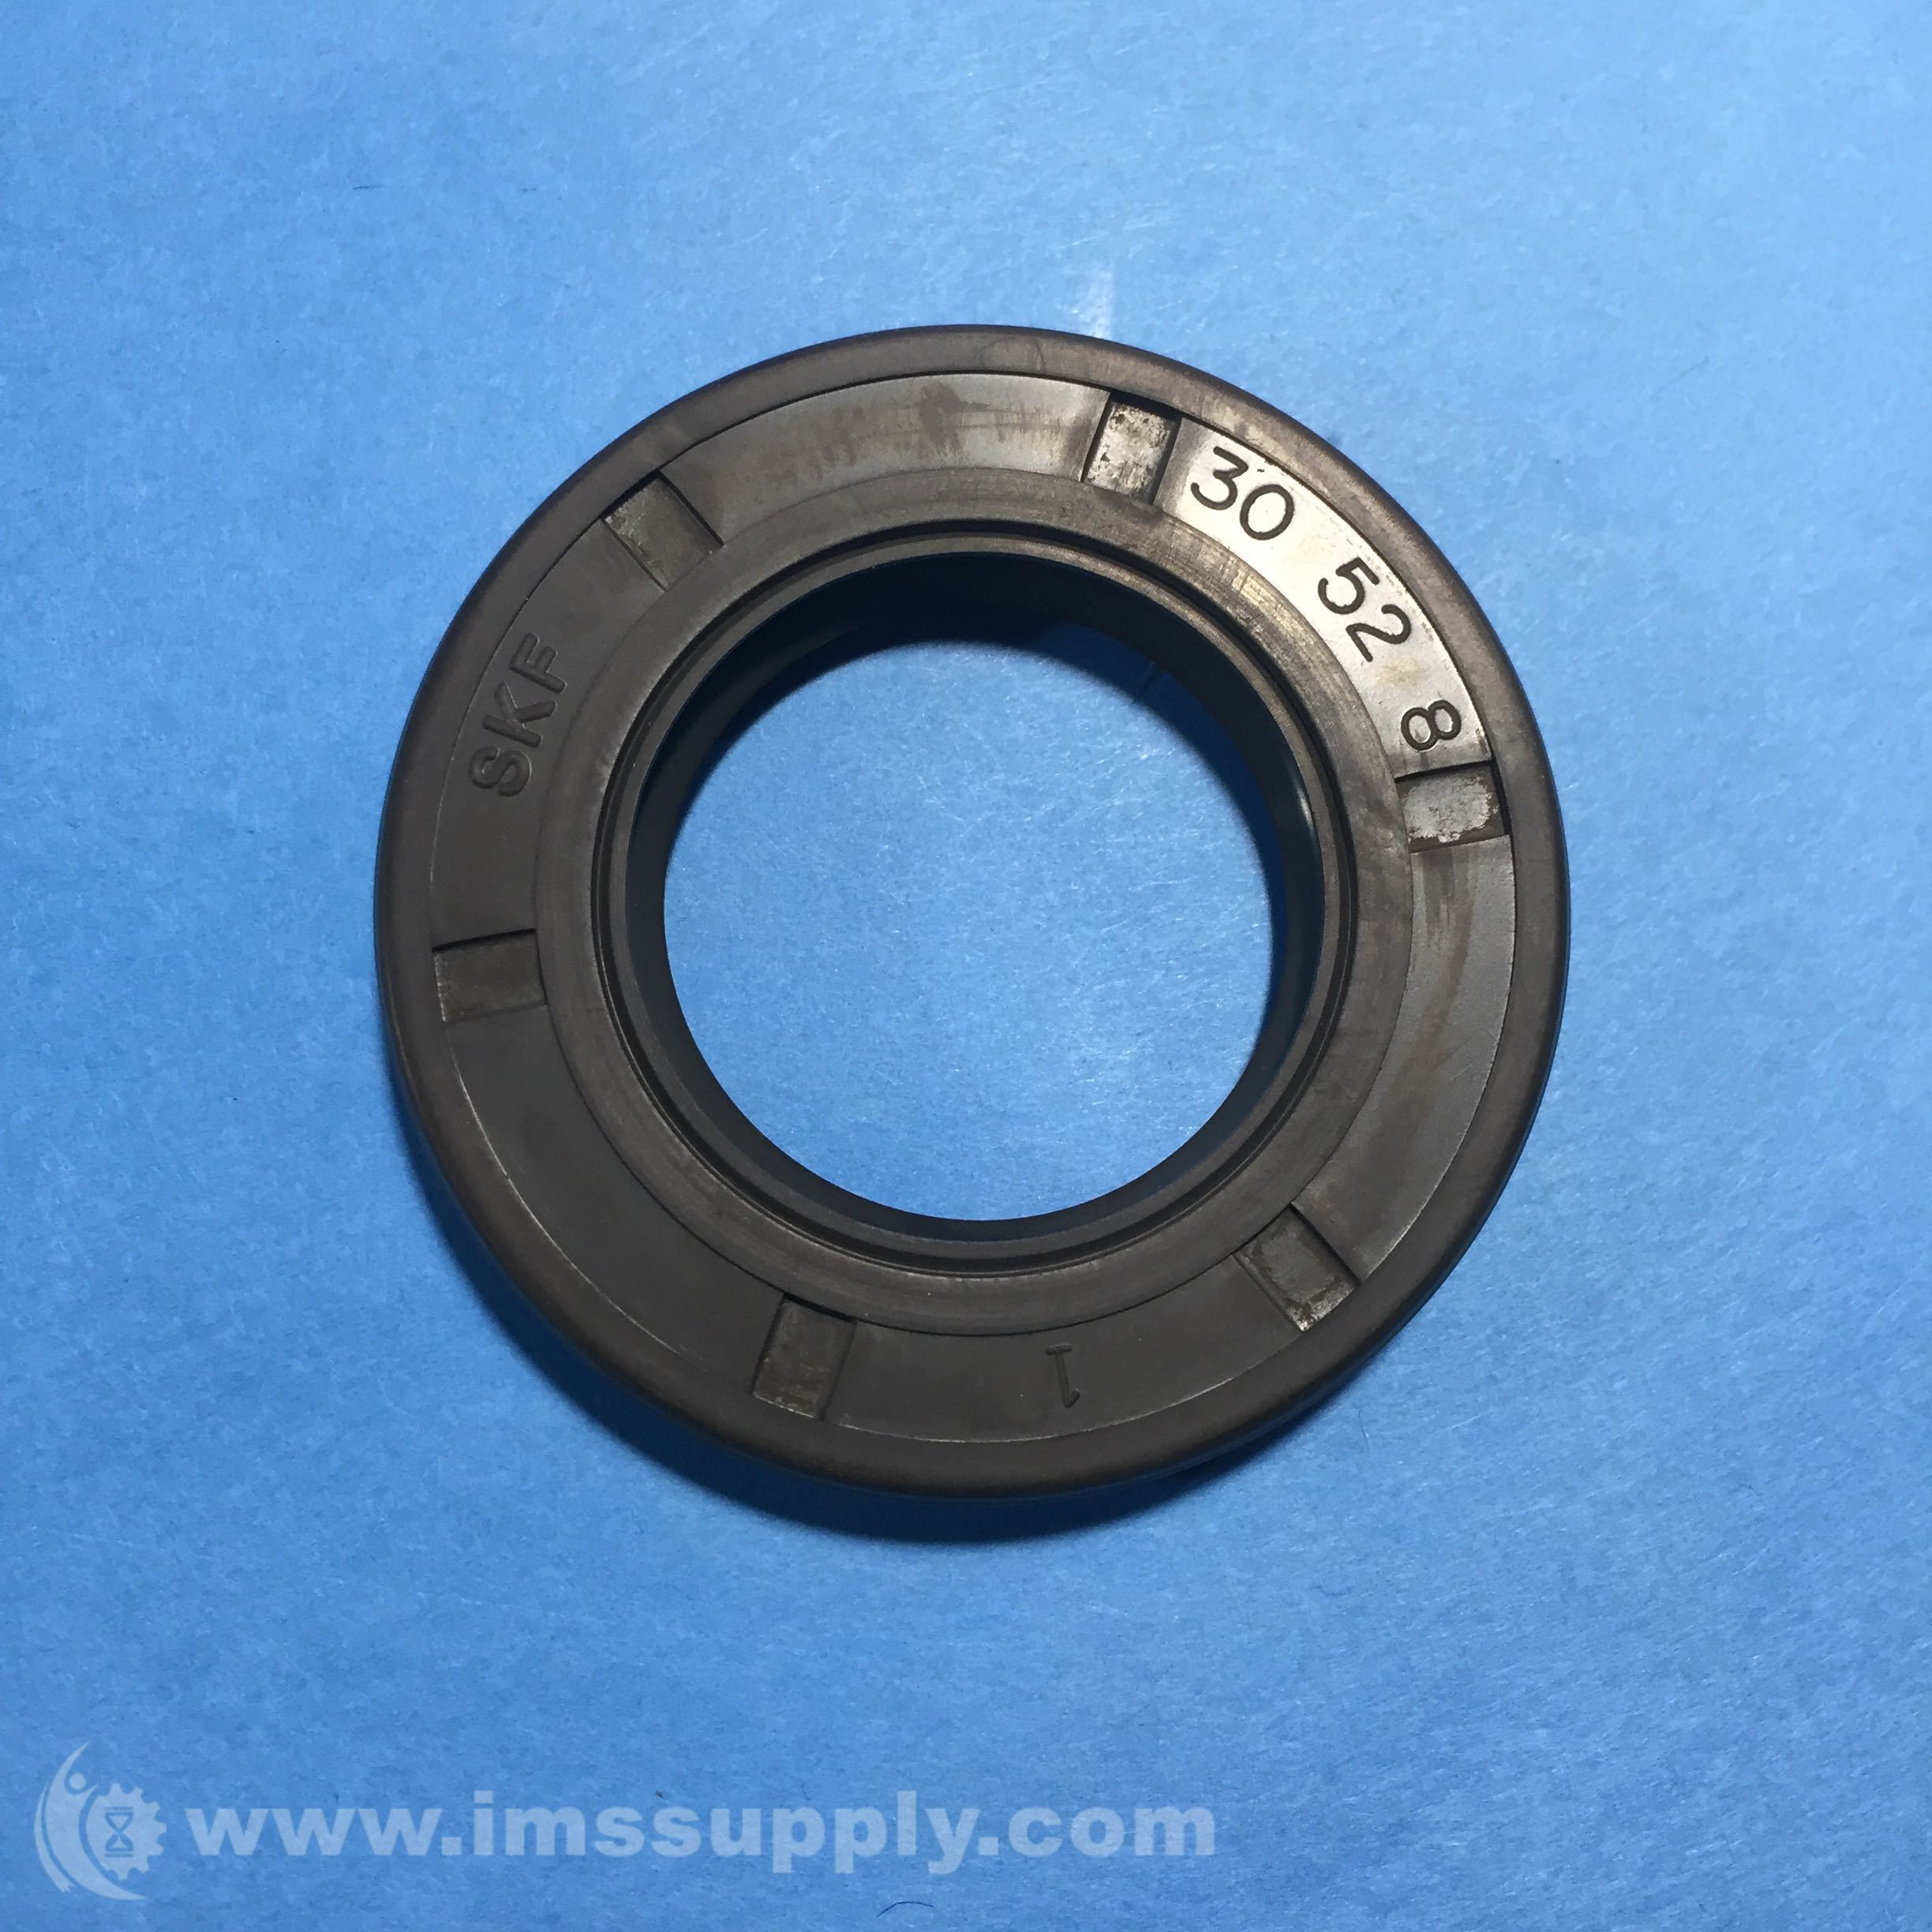 Rotary shaft oil seal 30 x 52 x height, model pack